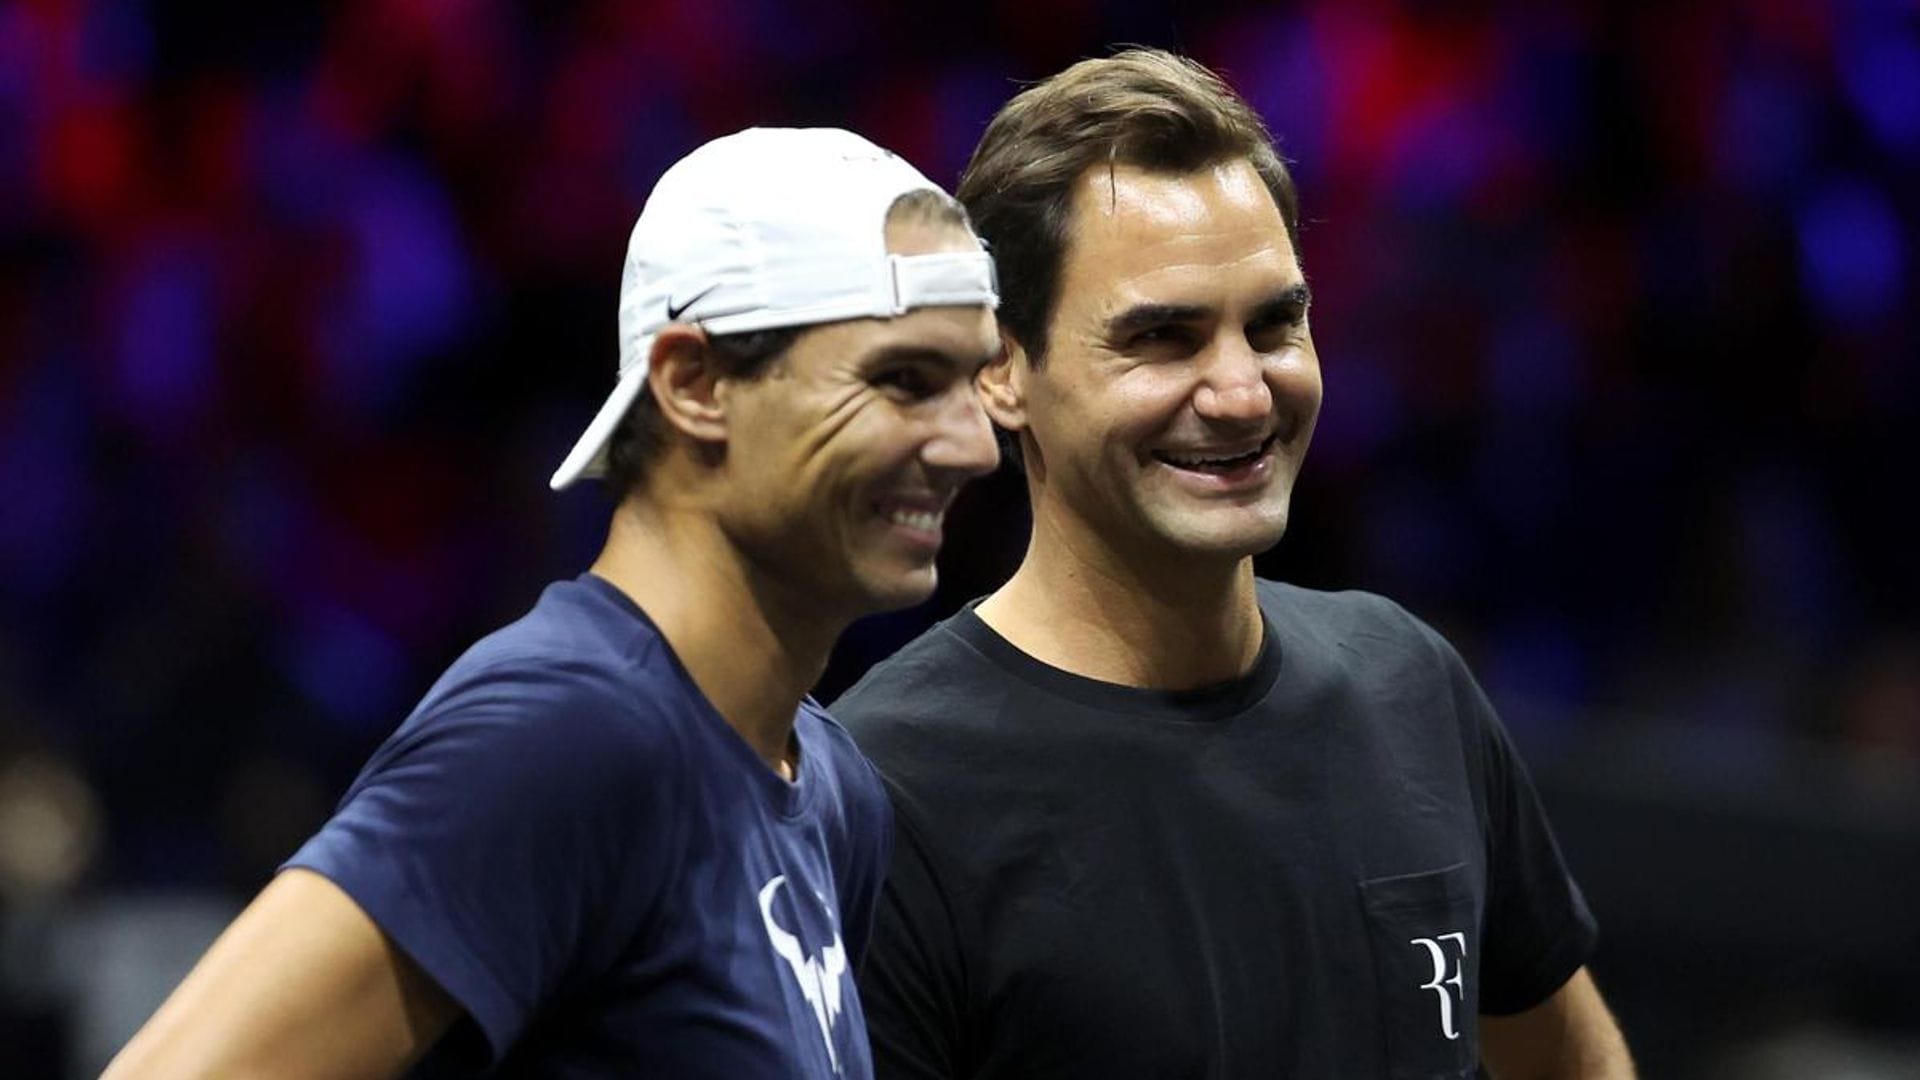 Rafa Nadal mentions Roger Federer in speech; ‘We’d like to be remembered as good people’